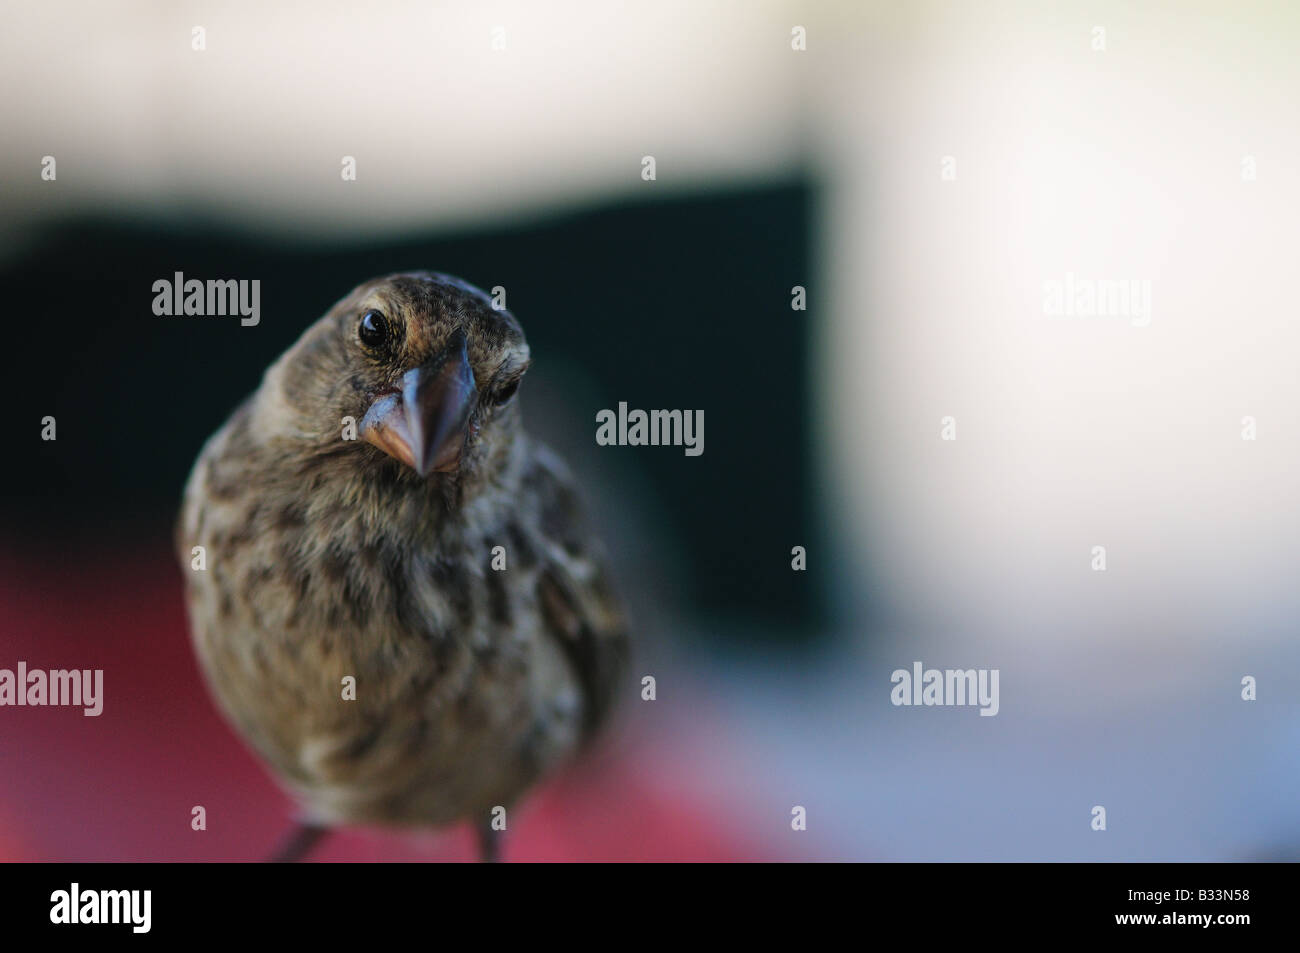 A small Finch gazes inquisitively at the viewer, sitting on a lunch table. The finch is a common symbol of evolution. Stock Photo